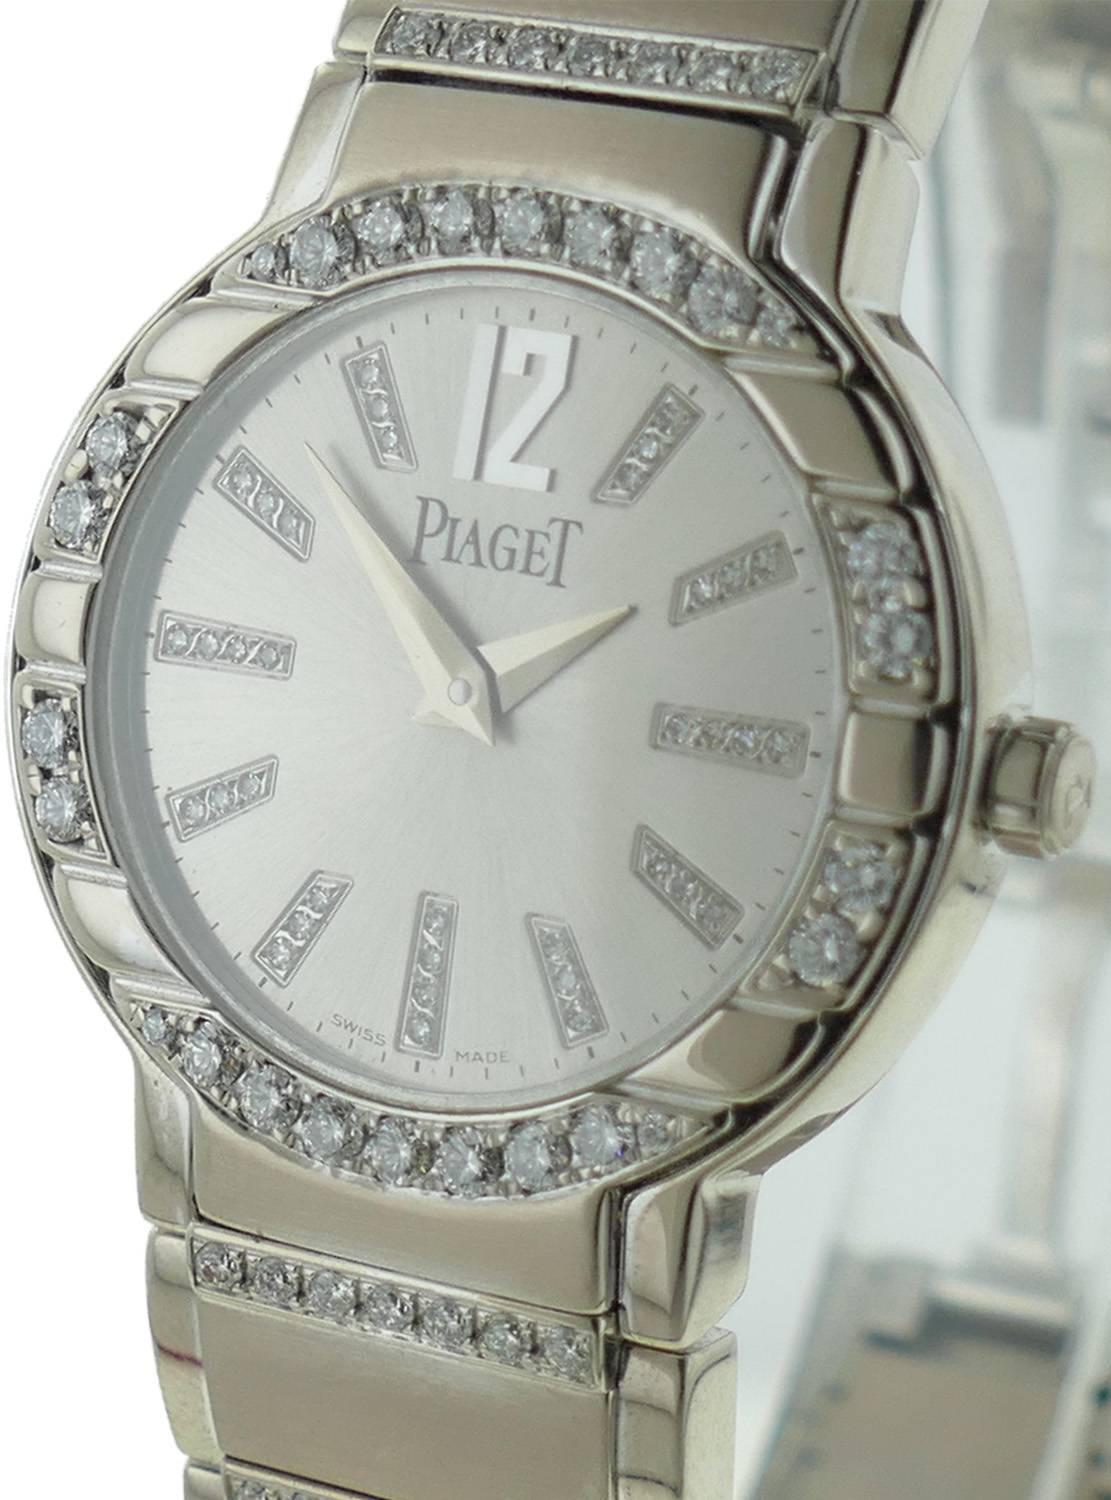 Offered For Sale is a Ladies (32mm) Piaget Polo 18k White Gold Watch W/ Diamonds on the Bezel & Bracelet, Ref G0A36233, Retails $66,000. The Watch is in Excellent Condition & Working Perfectly; Movement is Battery Operated. The Watch Bracelet fits